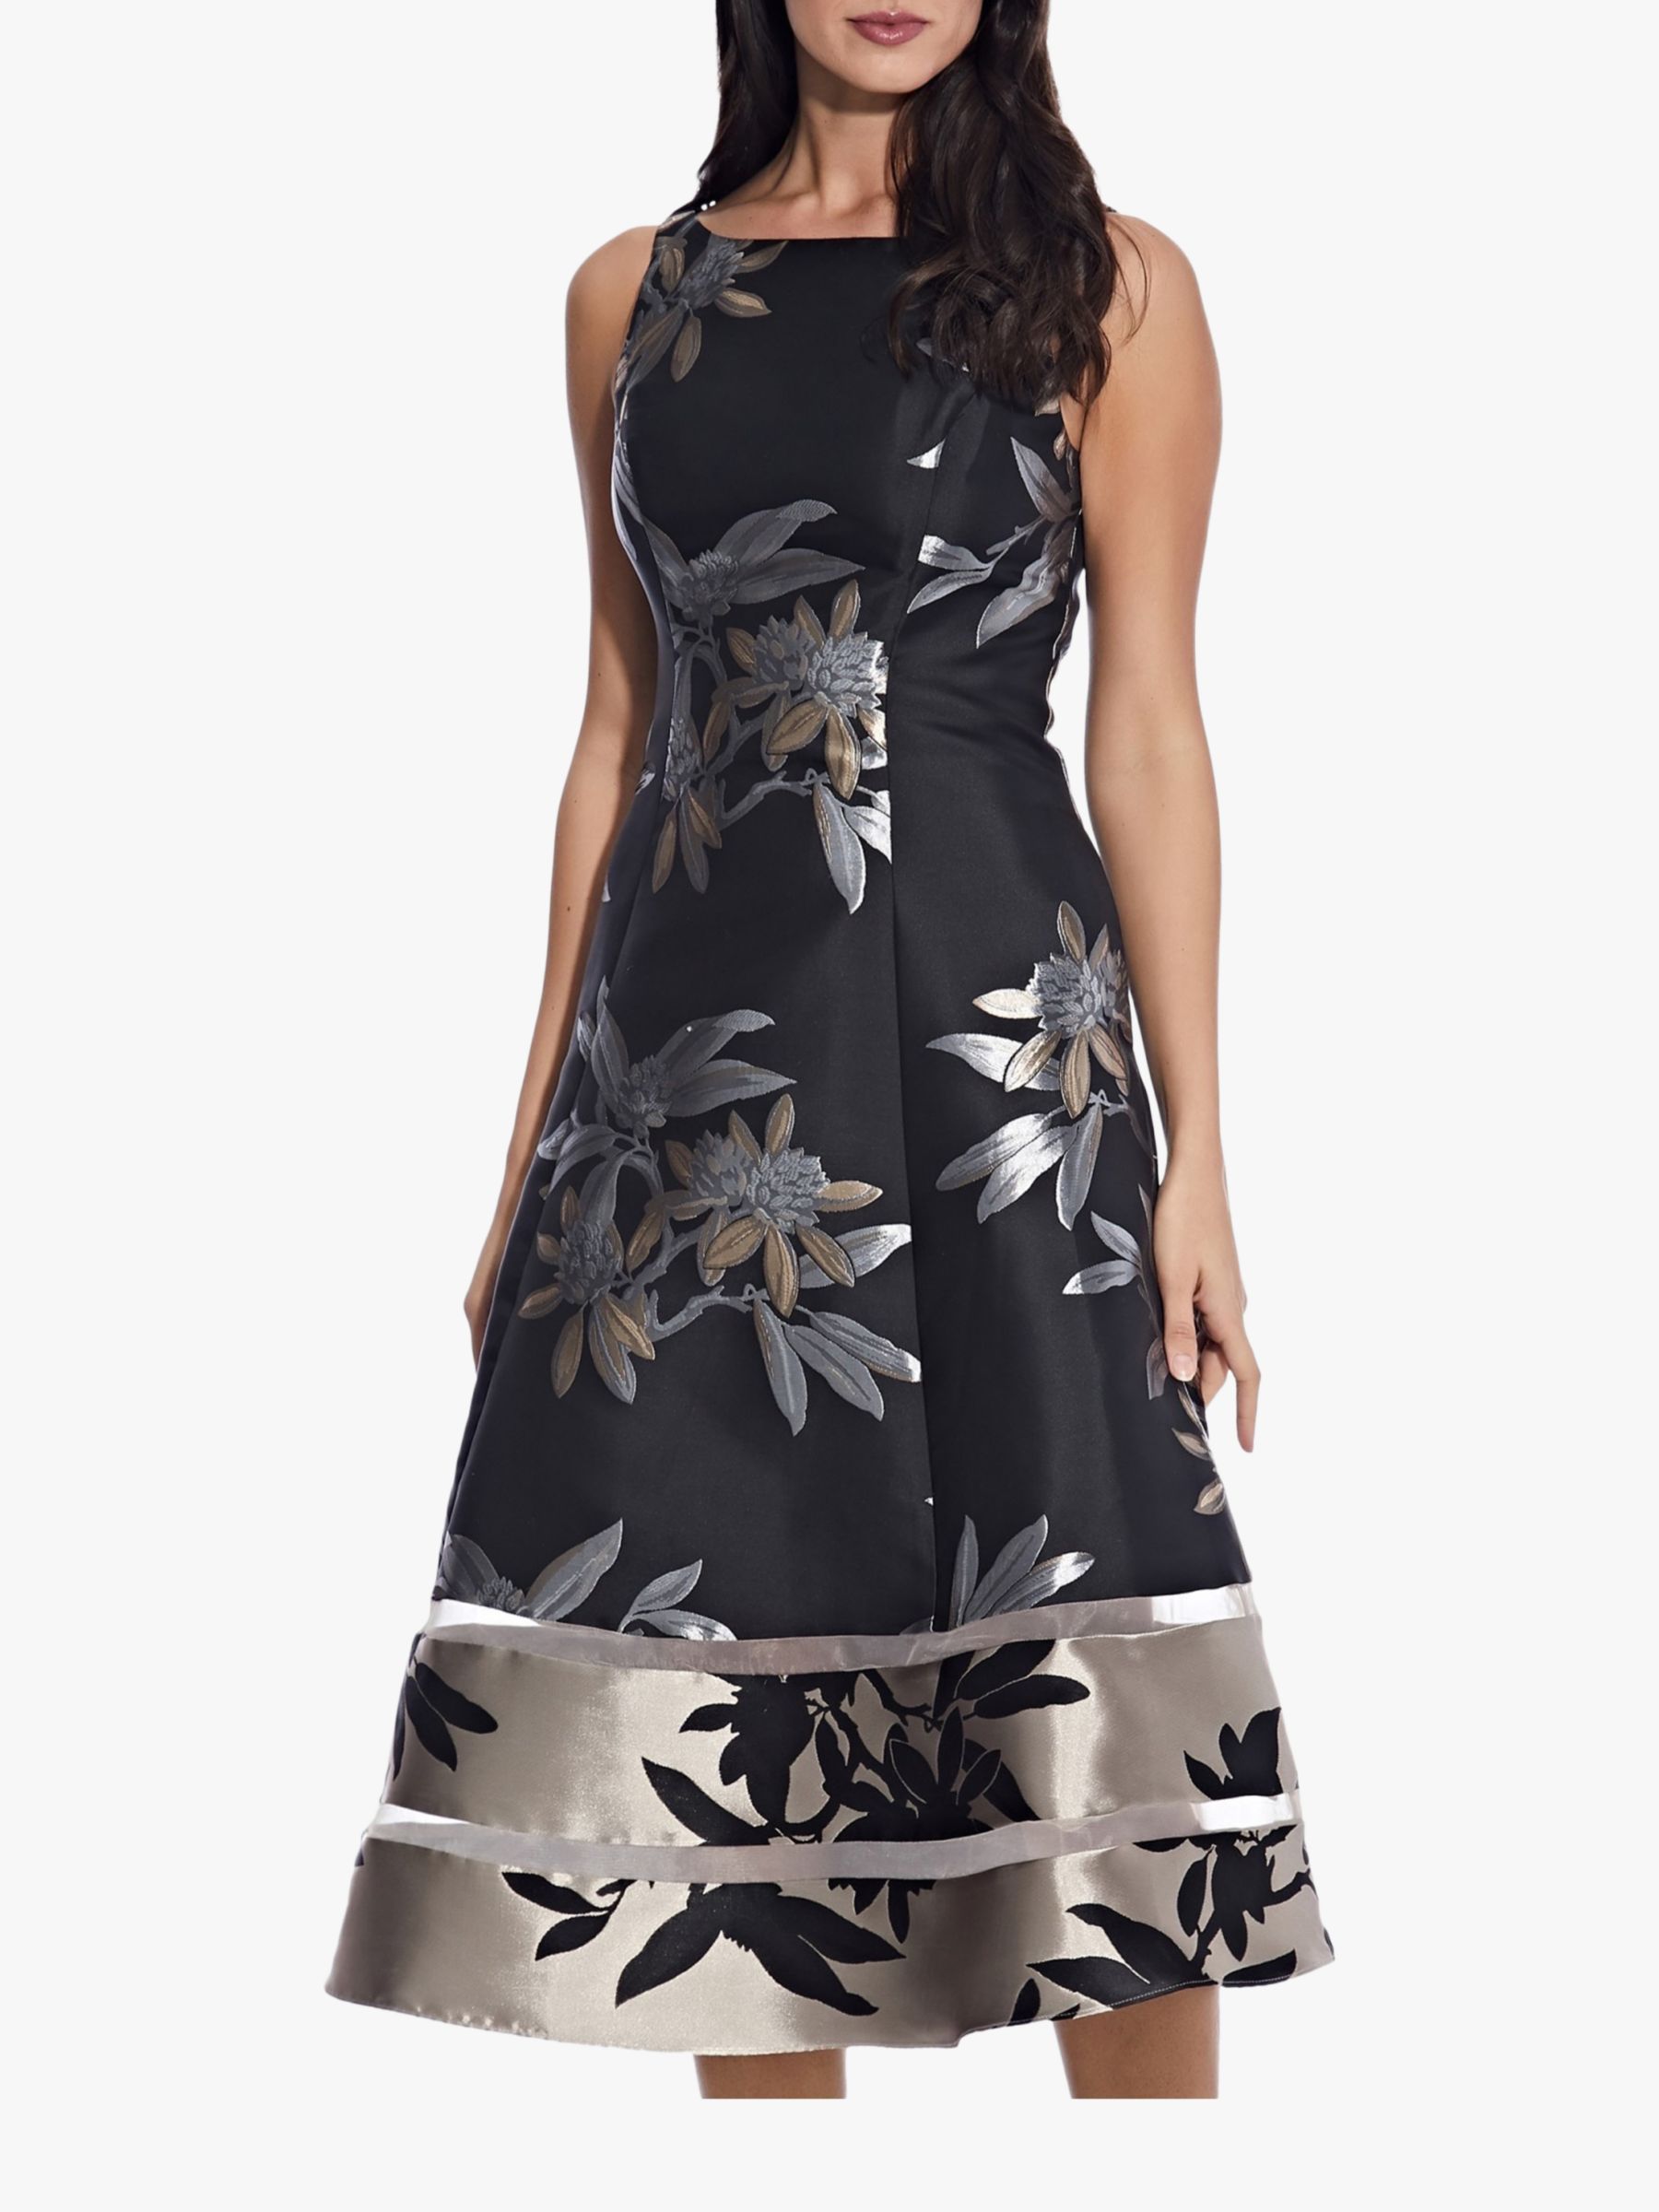 Adrianna Papell Floral Jacquard Dress, Black/Champagne